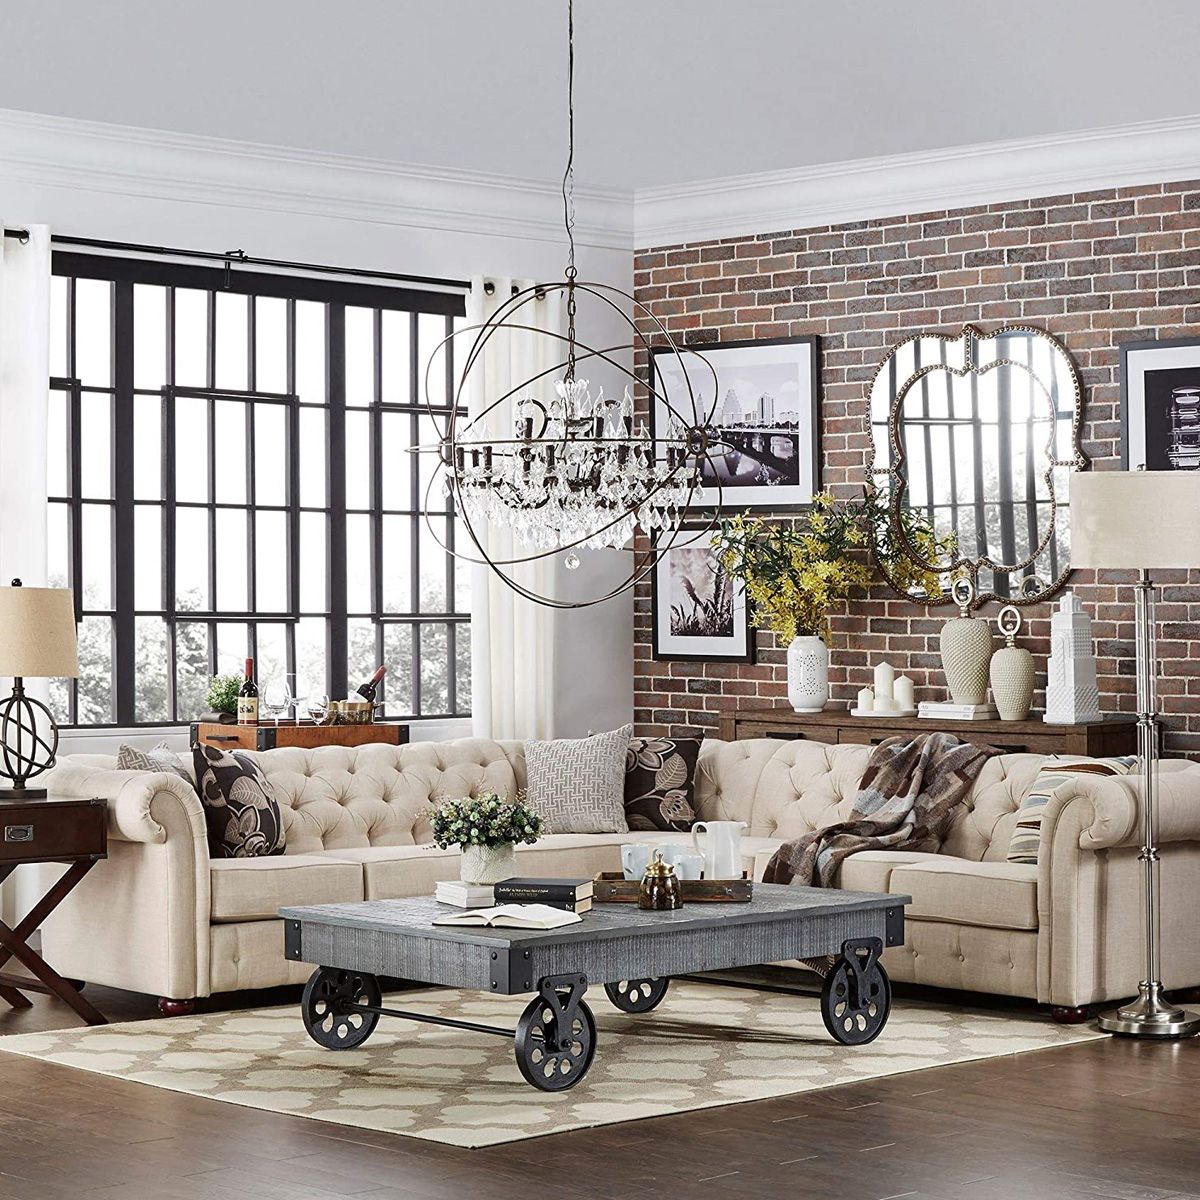 Tufted Scroll Arm Chesterfield 7 Seat L Shaped Sectional Sofa In Beige  Color From Aed 5849 | Atoz Furniture Within Beige L Shaped Sectional Sofas (Photo 14 of 15)